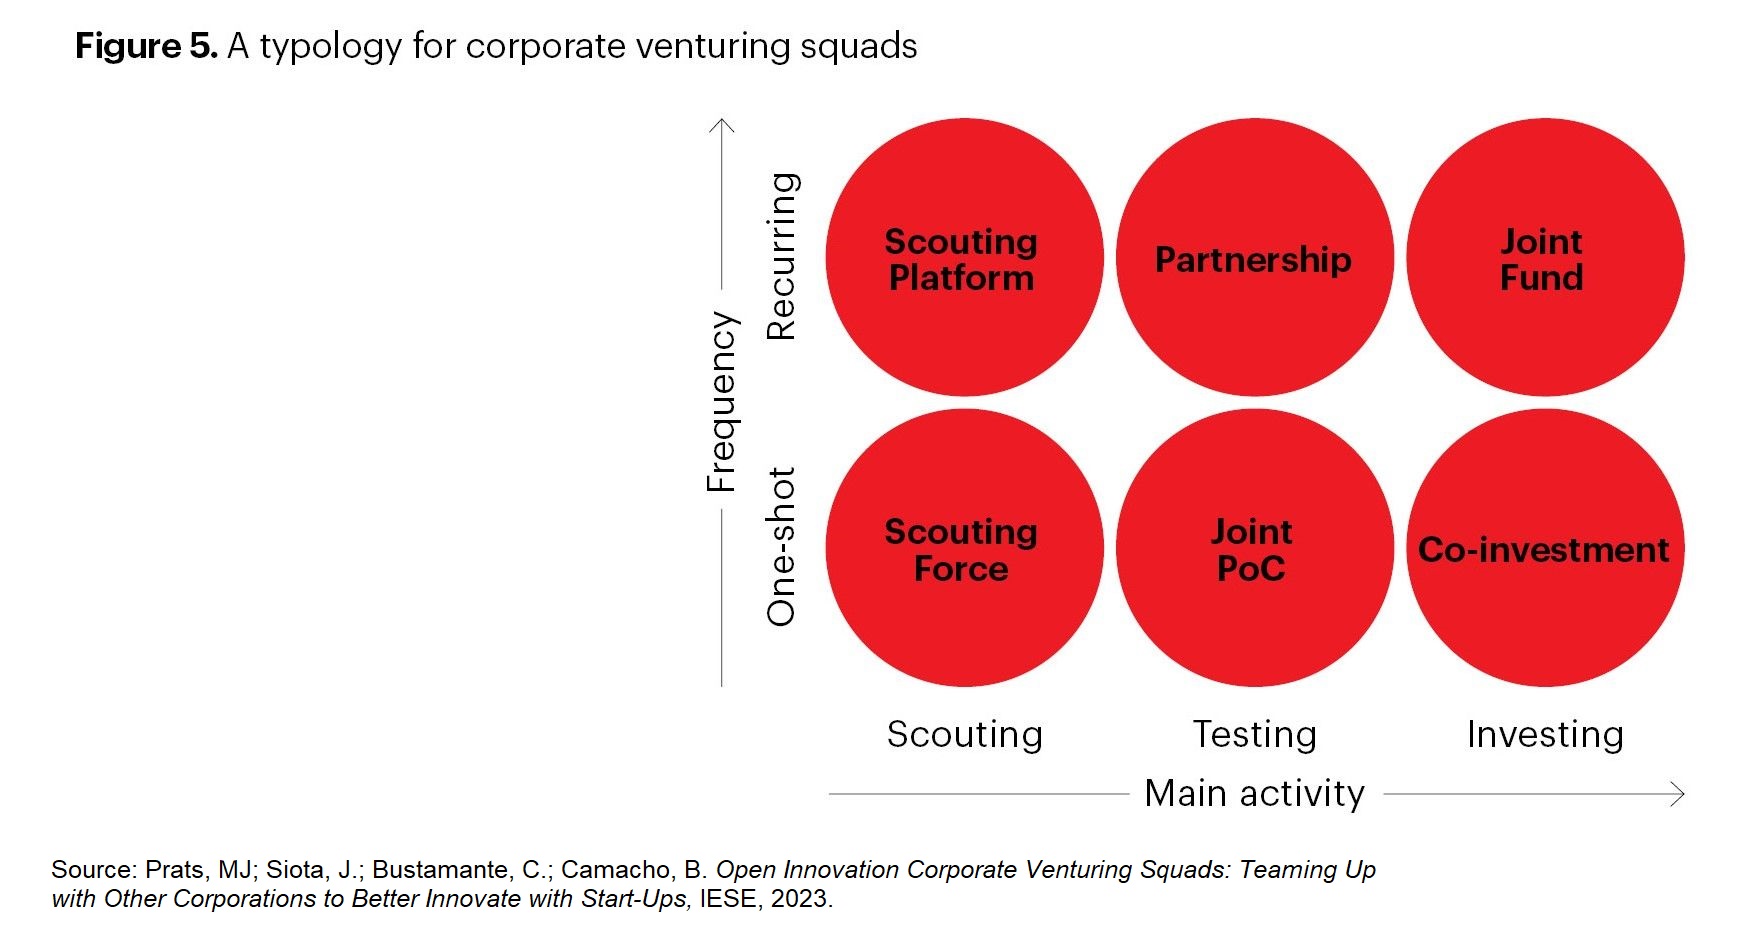 Bubble chart showing the six different types of corporate venturing squads. Source: Pratts, MJ; Siota, J.; Bustamante, C.; Camacho, B. Open Innovation Corporate Venturing Squads: Teaming Up with Other Corporations to Better Innovate with Start-Ups, IESE, 2023.